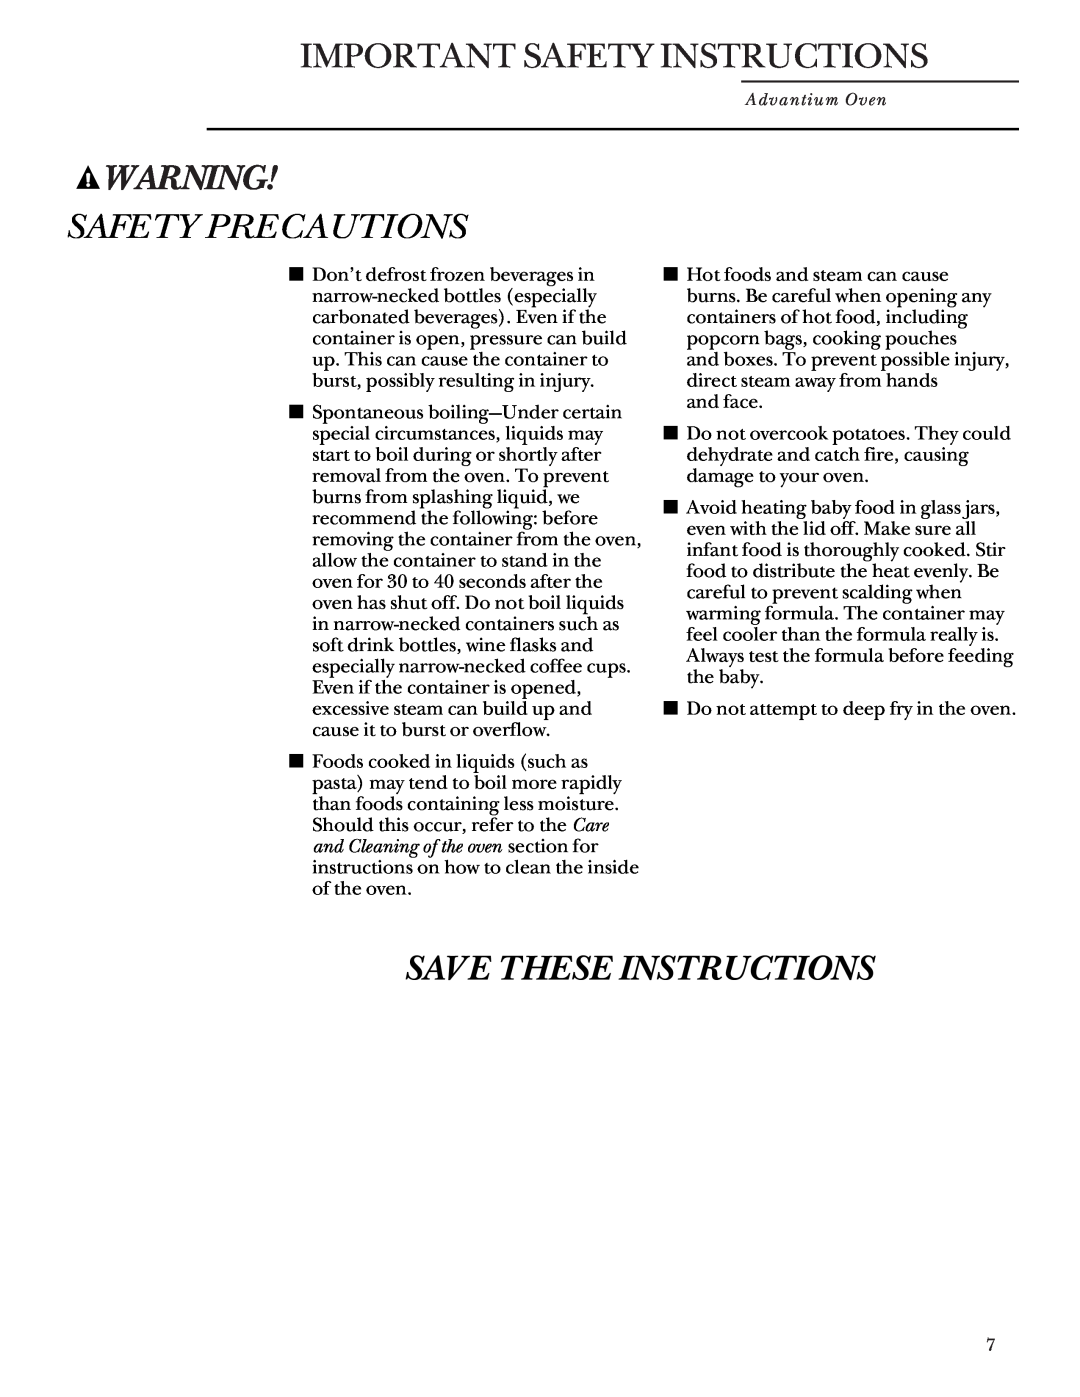 GE SCA 2001, SCA 2000 owner manual Save These Instructions, Important Safety Instructions, Safety Precautions 